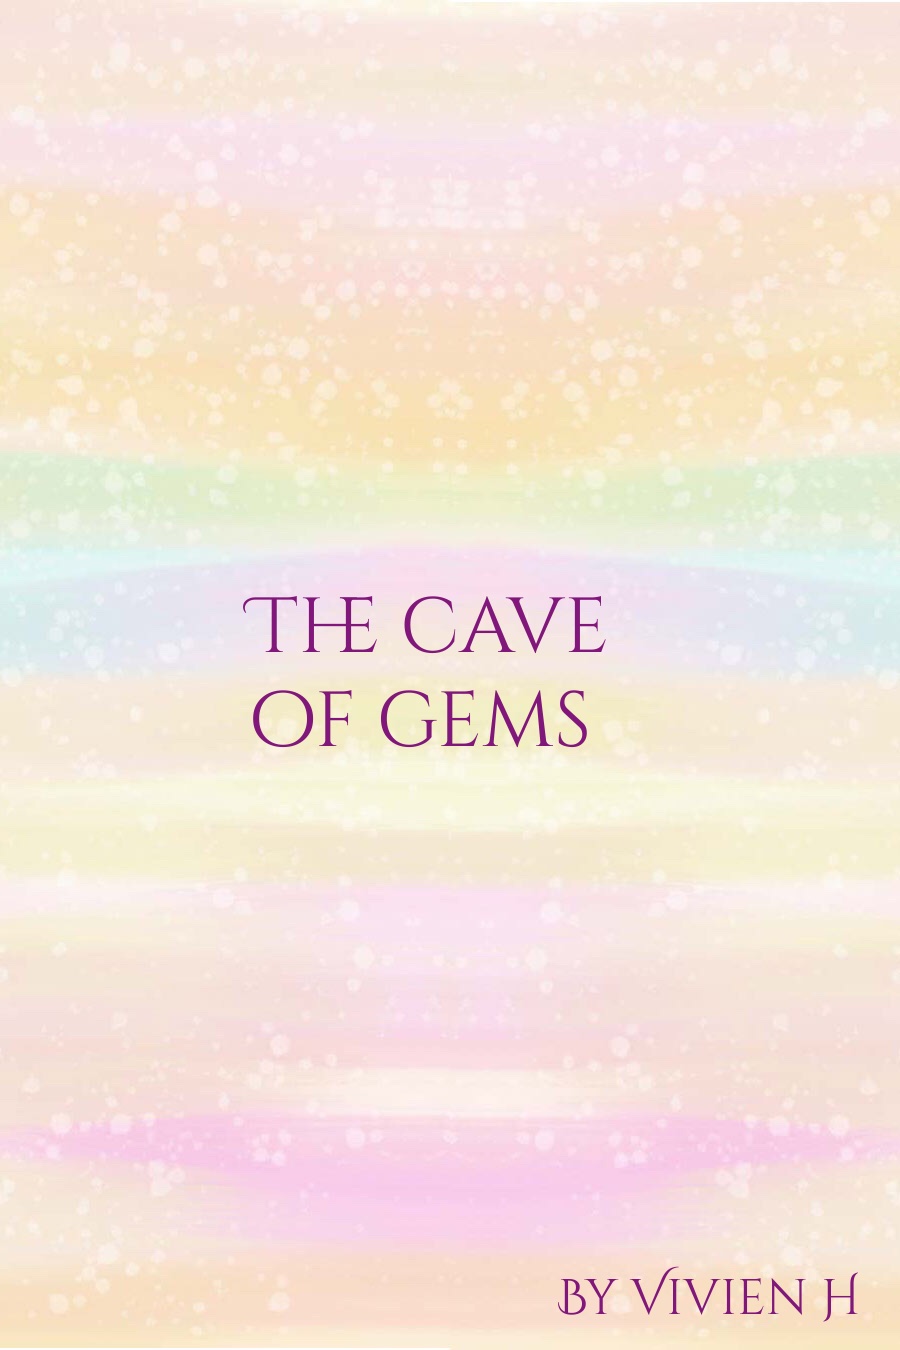 The Cave of Gems by Vivien H